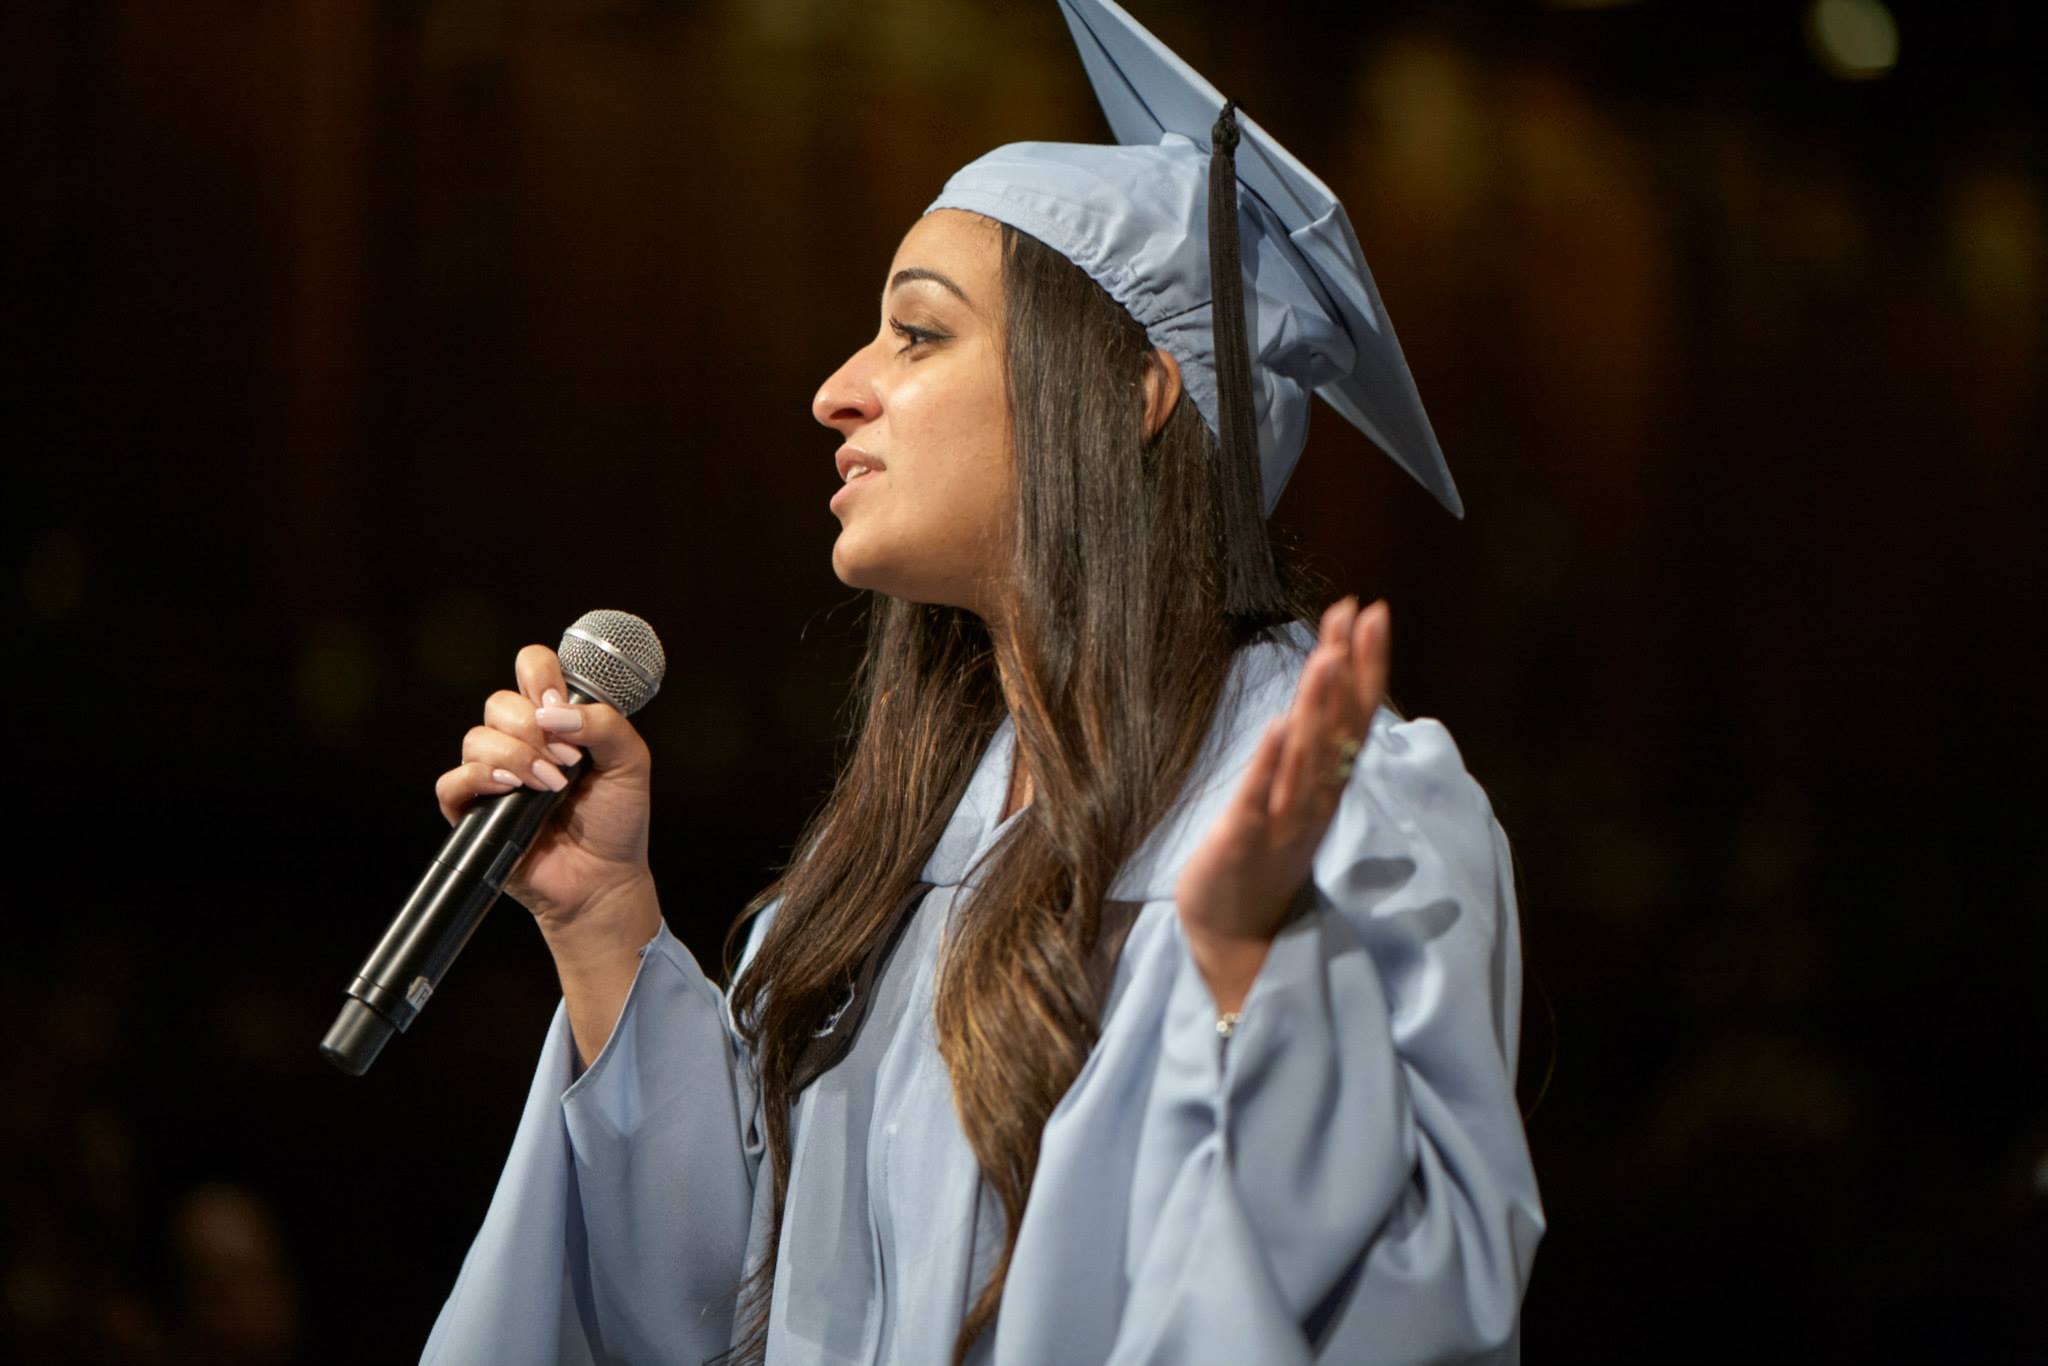 Francani performed twice during TC's 2015 Convocation ceremonies, regaling the audience with her own performance and also stepping in when another act canceled.